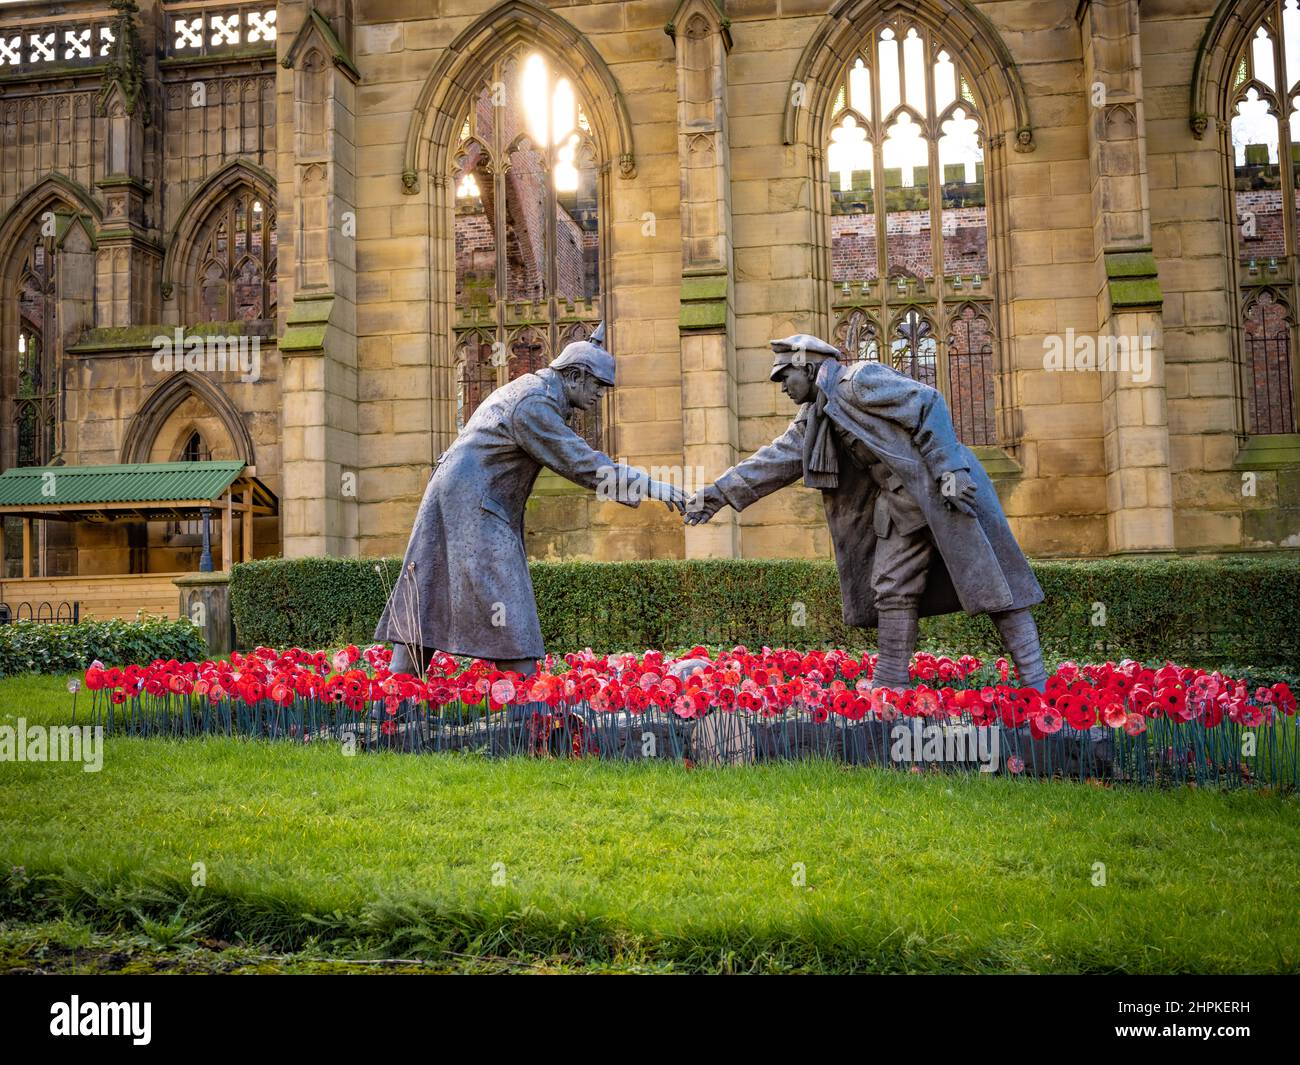 Andy Edwards; 'Christmas truce'; St Luke's Church; 'All together now'; truce; Christmas truce; Stock Photo